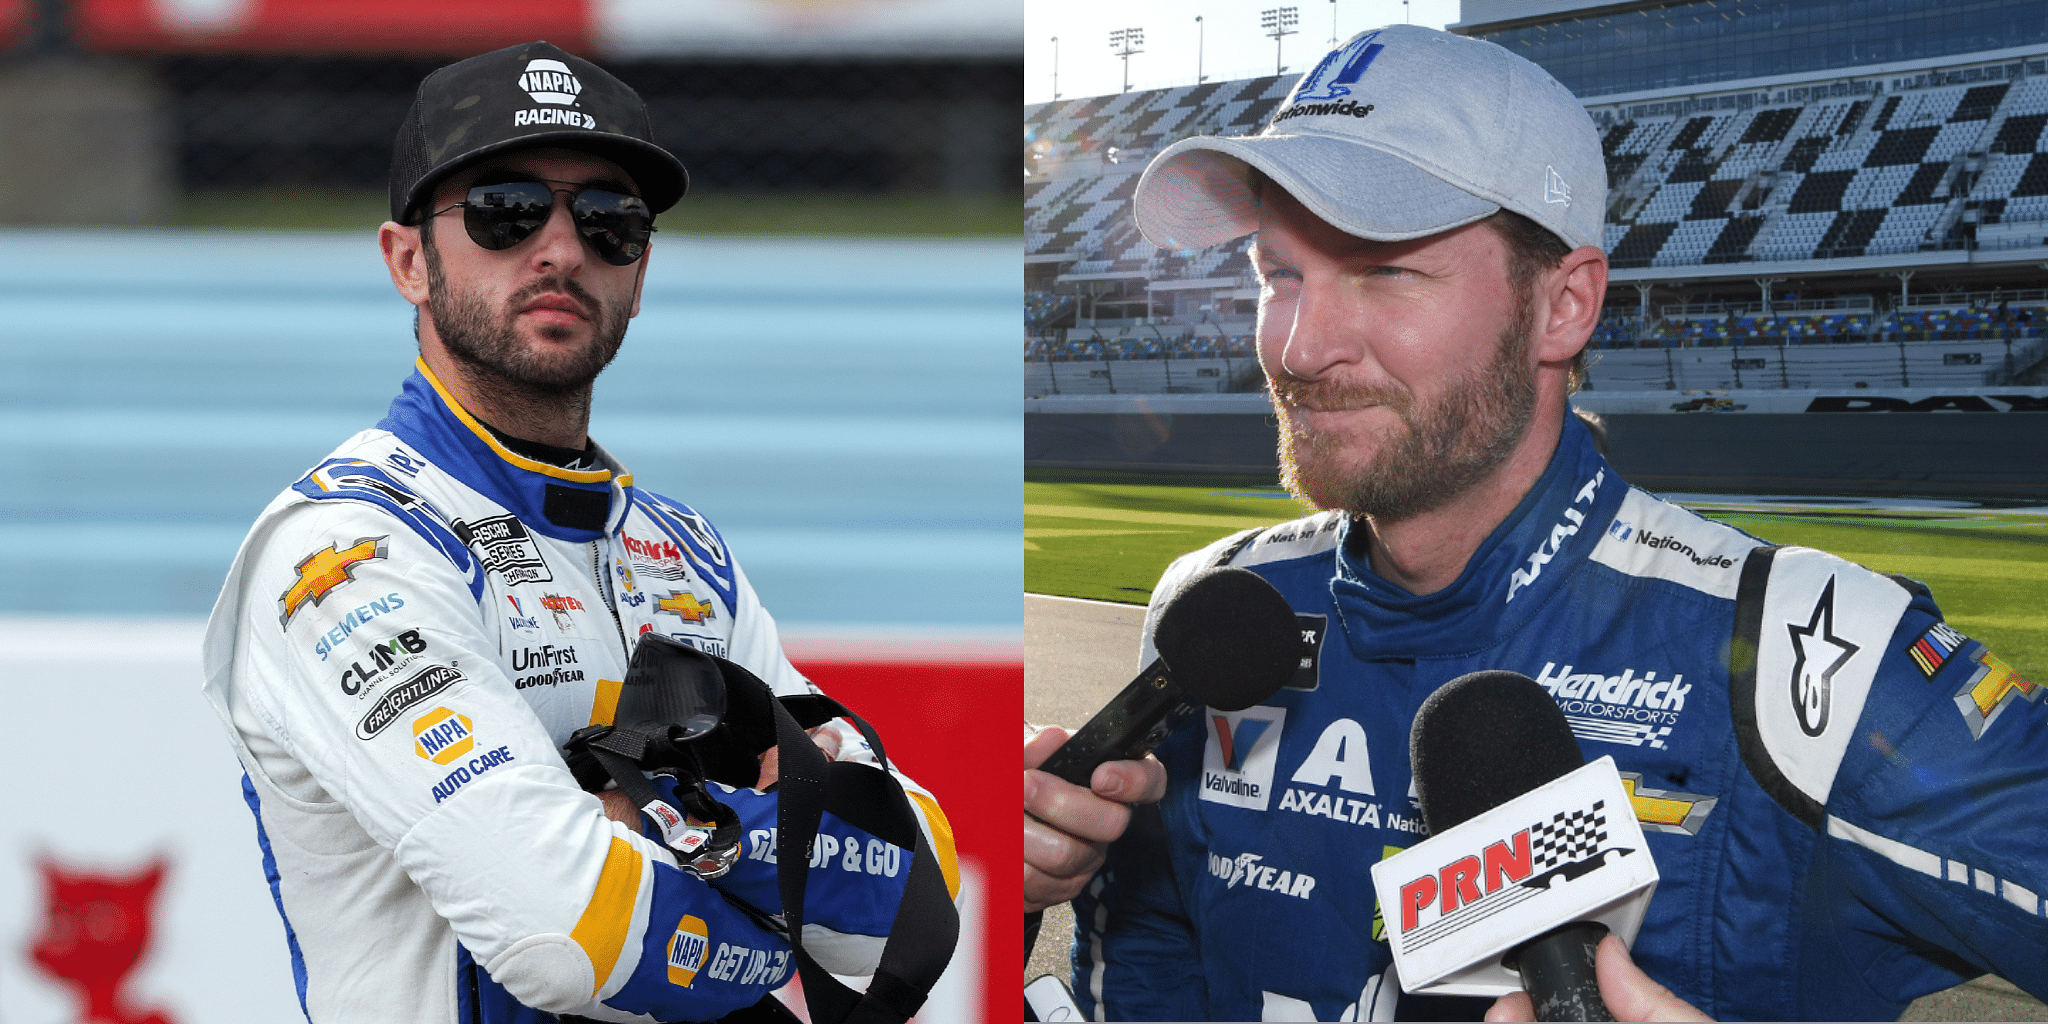 “Just Stop Worrying About Losing”: Dale Earnhardt Jr. Looks at Chase Elliott “As an Example” in His Retirement